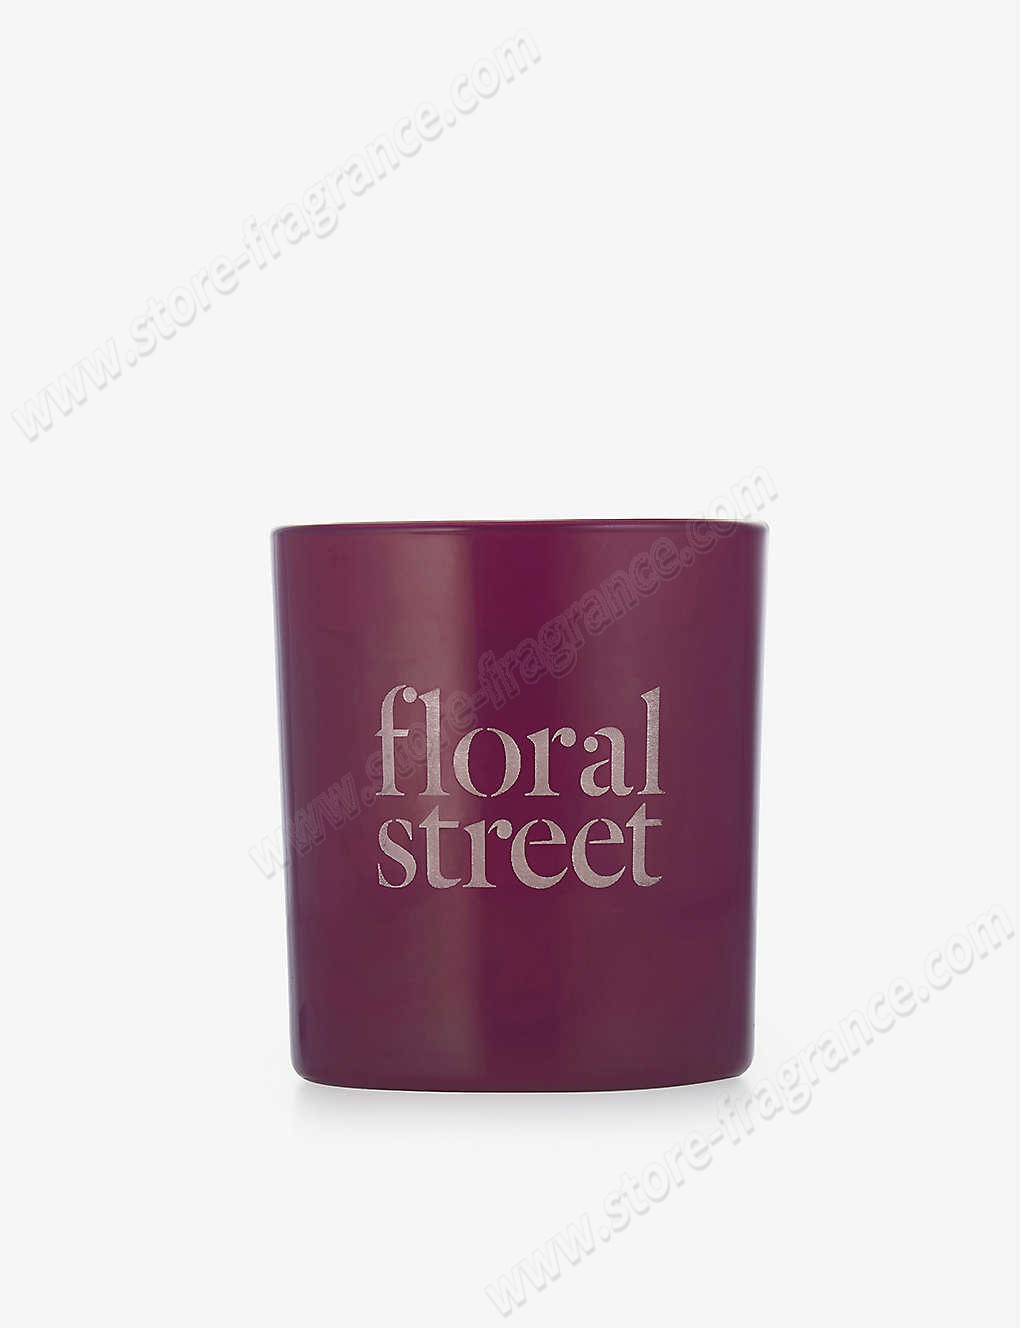 FLORAL STREET/Santal candle 200g ✿ Discount Store - FLORAL STREET/Santal candle 200g ✿ Discount Store